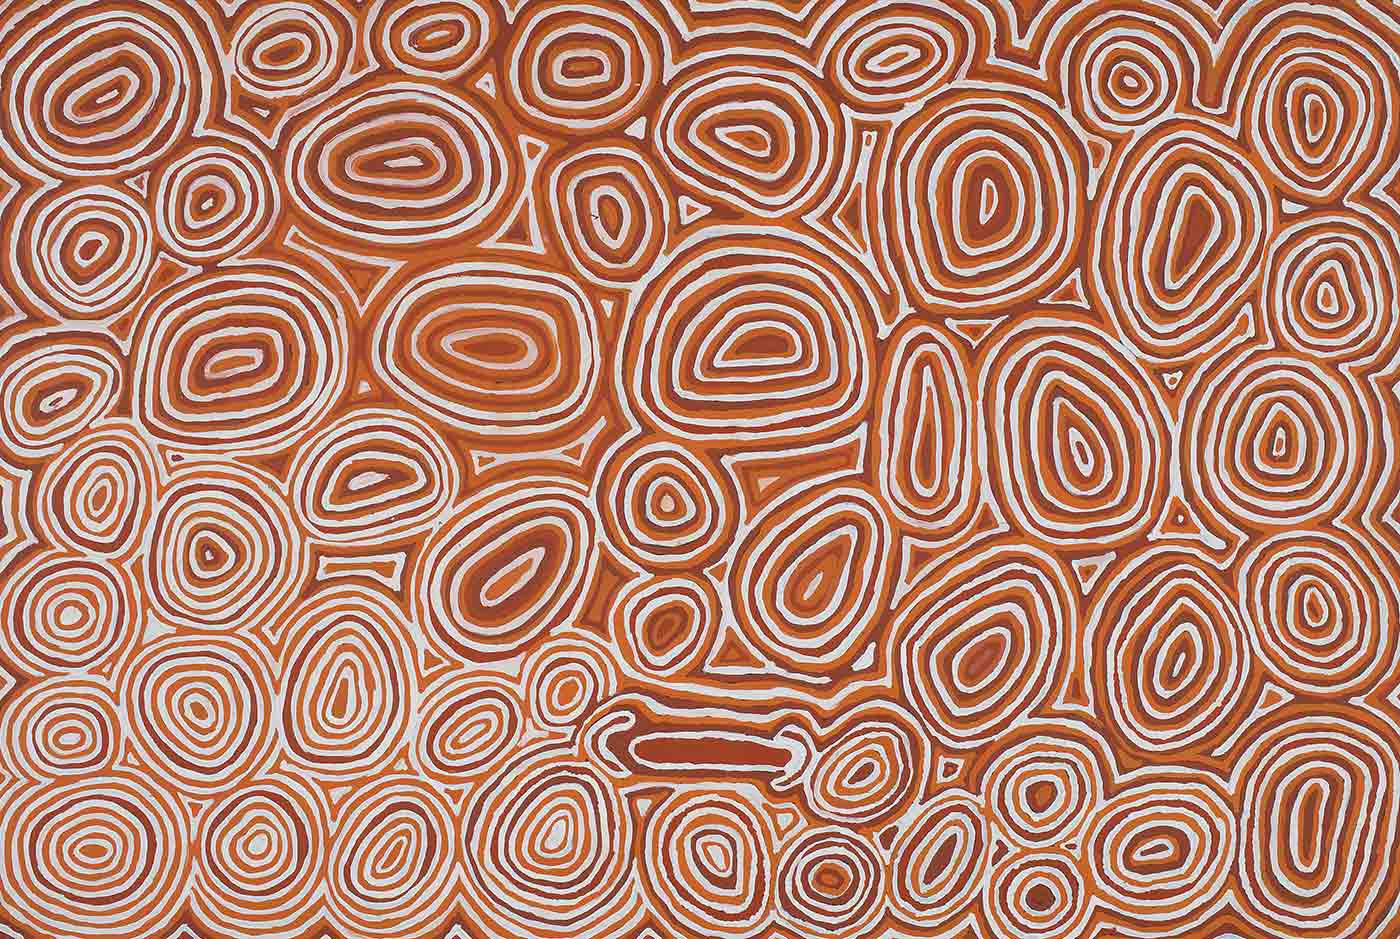 A painting on brown linen covered in concentric ovals and circles in white, light brown and dark brown with spaces between filled in the same colours. In the centre is a concentric circle with a flat bottom edge, and towards the bottom centre edge is a brown horizontal line with a C shape wrapped around each end. In the lower left corner the circles have wider white rings giving the appearance of a lighter area of ground.